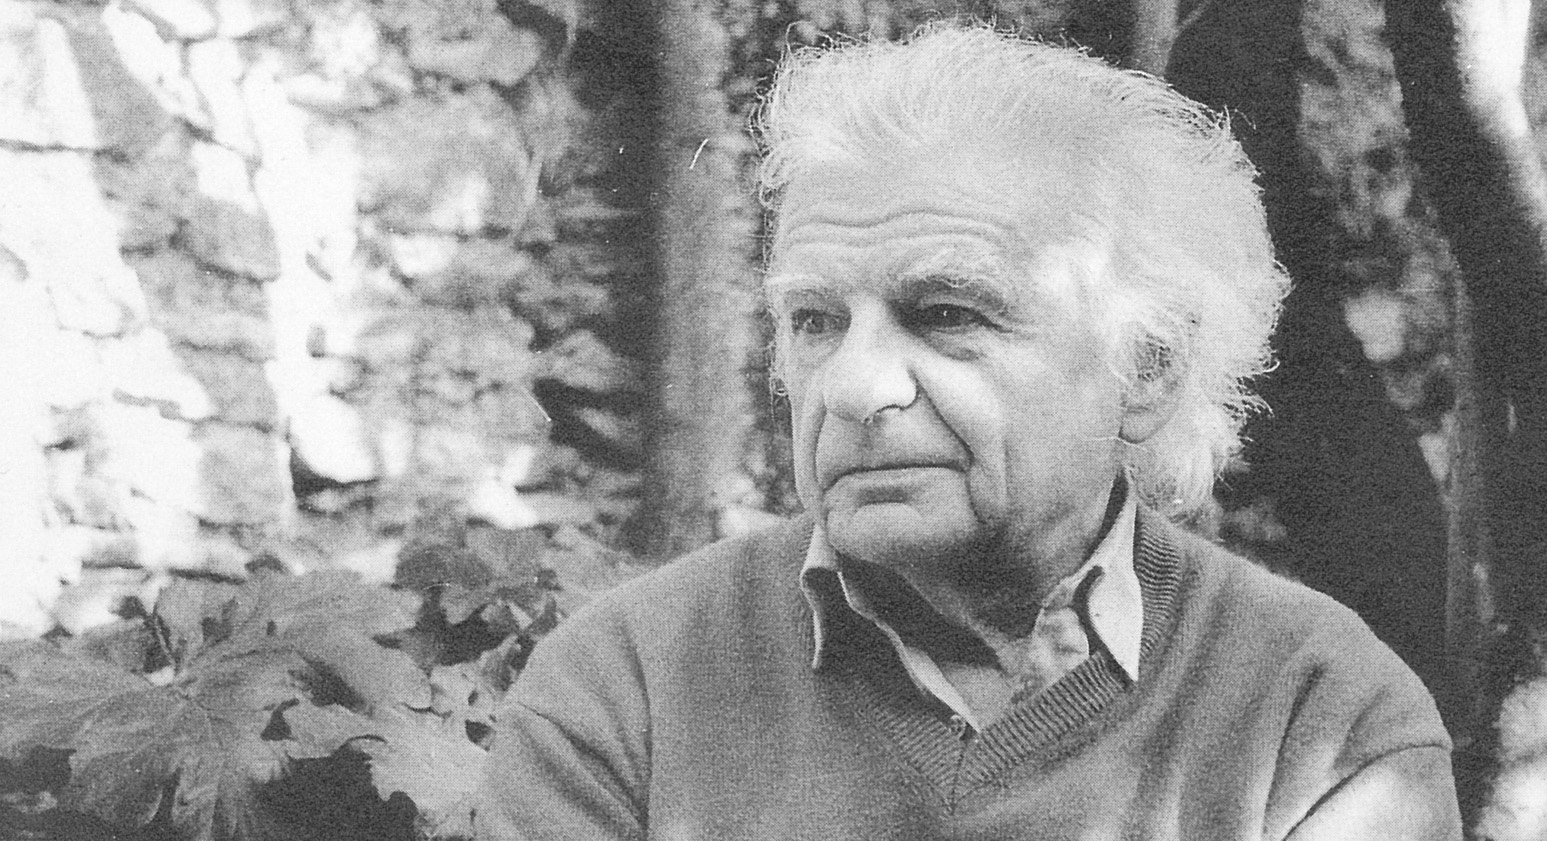 Yves Bonnefoy, France’s most famous contemporary poet and winner of the “Golden Wreath” of SPE in 1999